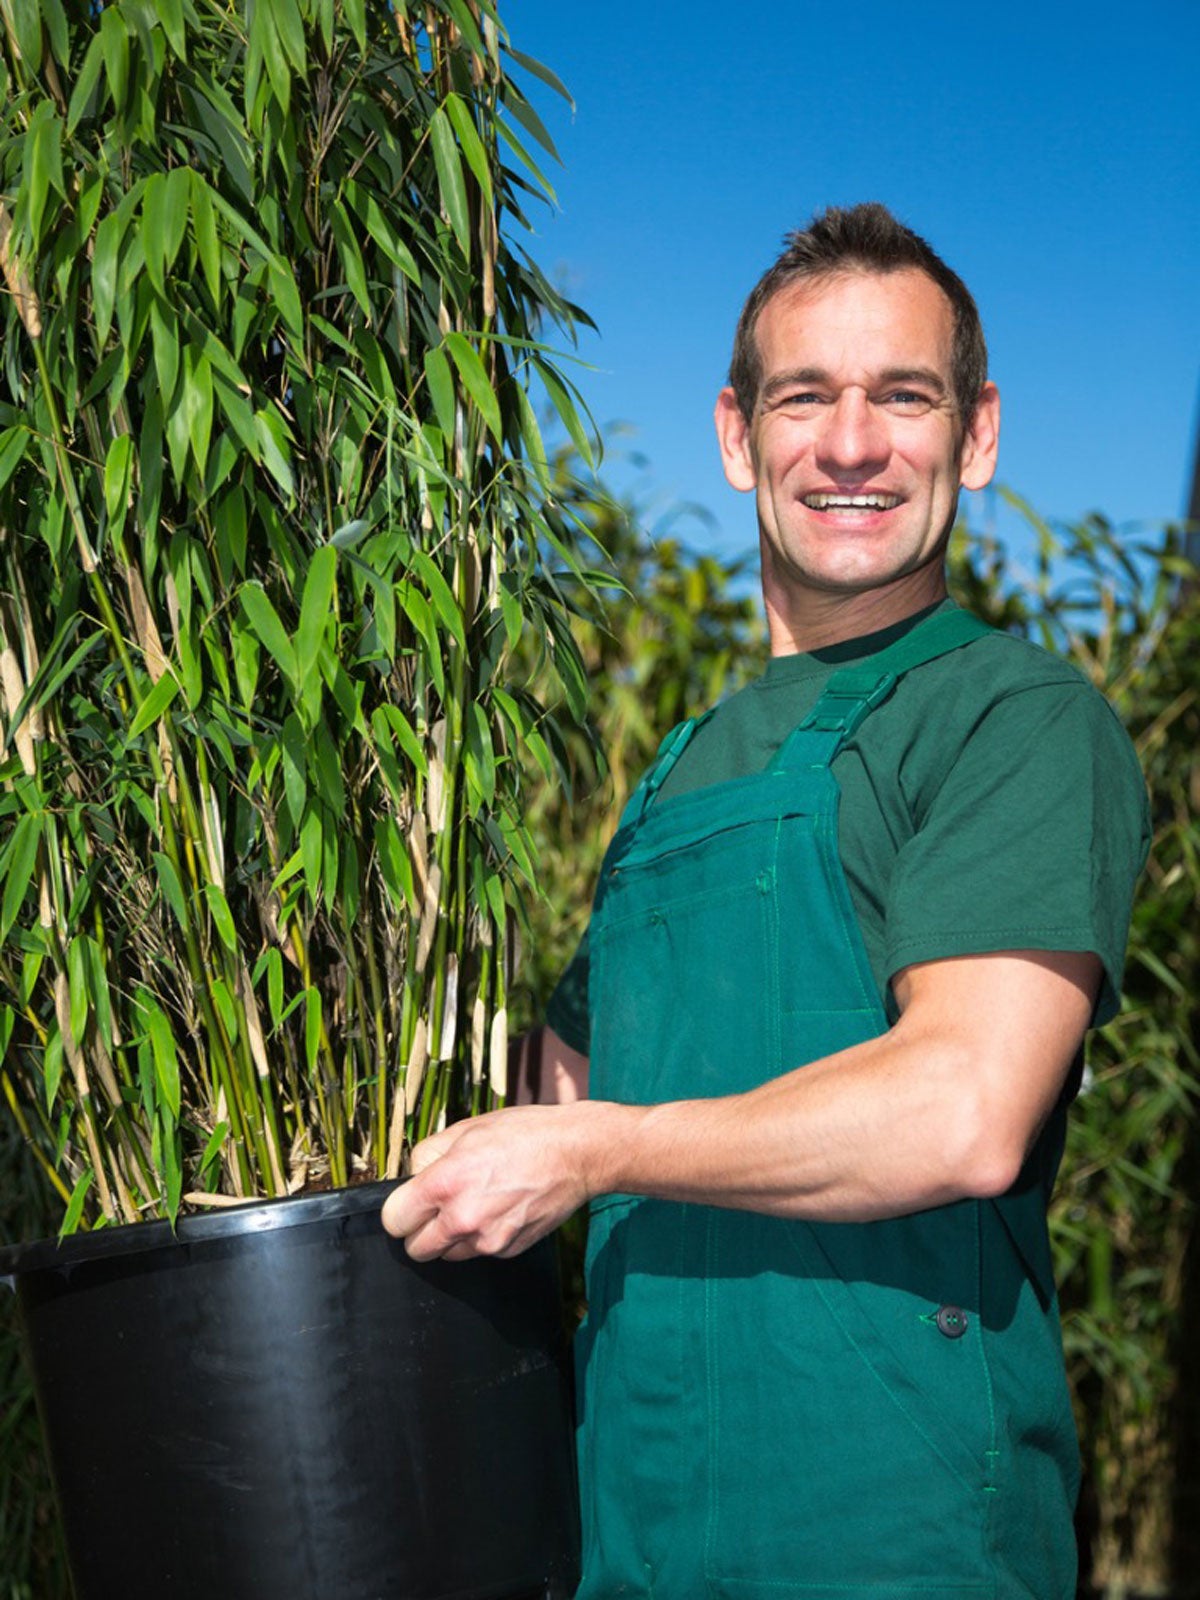 How To Divide Large Potted Bamboo, How To Care For Outdoor Potted Bamboo